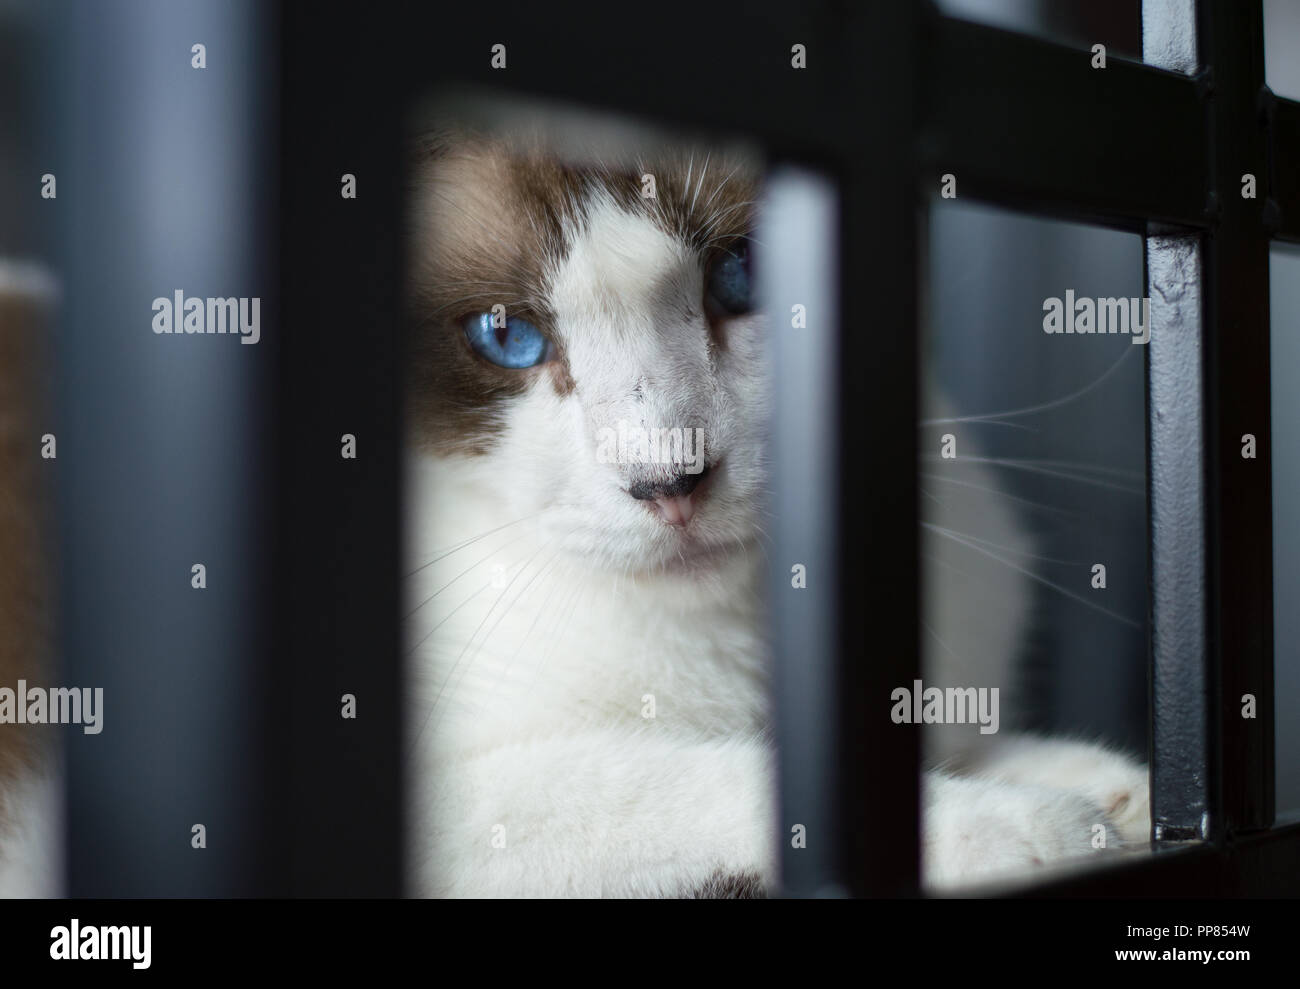 White Snowshoe Cat with blue eyes sitting on a black chair looking right at you. Stock Photo